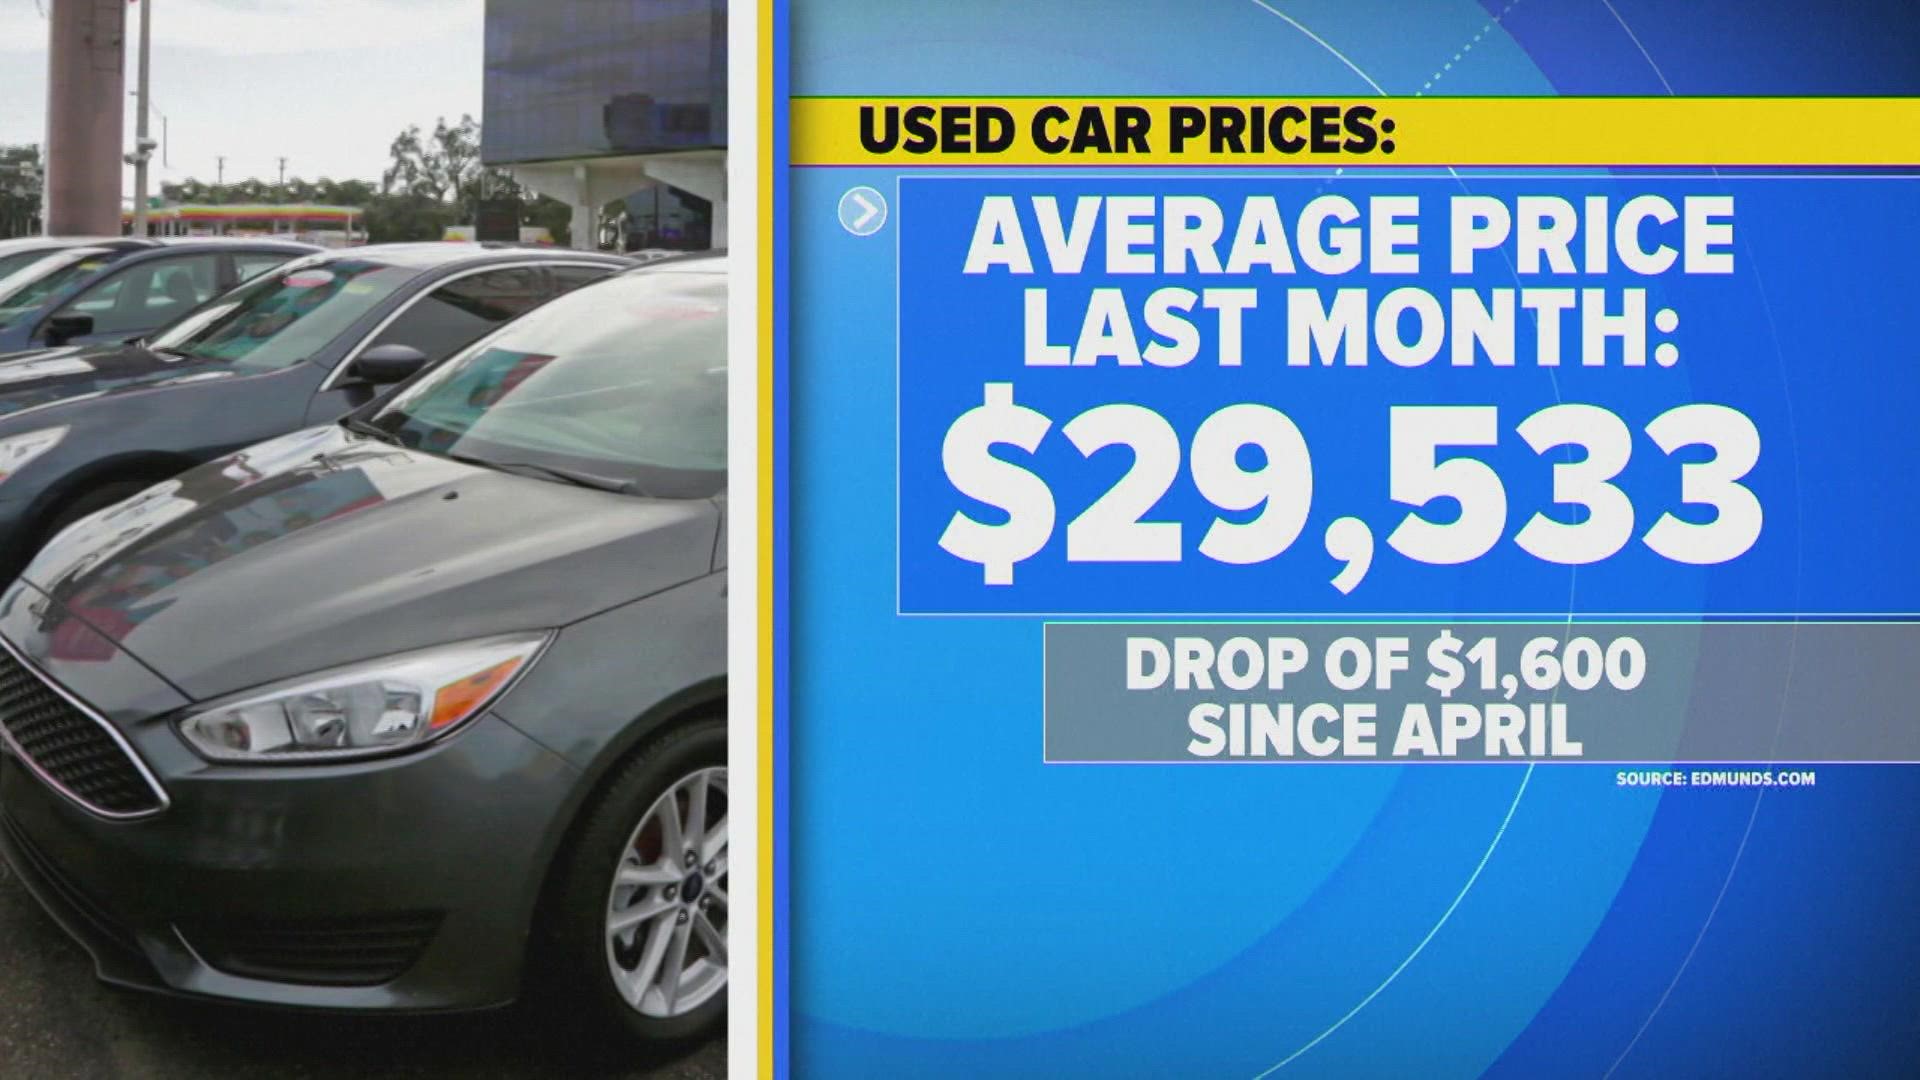 Keep in mind, prices will vary depending on multiple factors, such as how new the used car is.